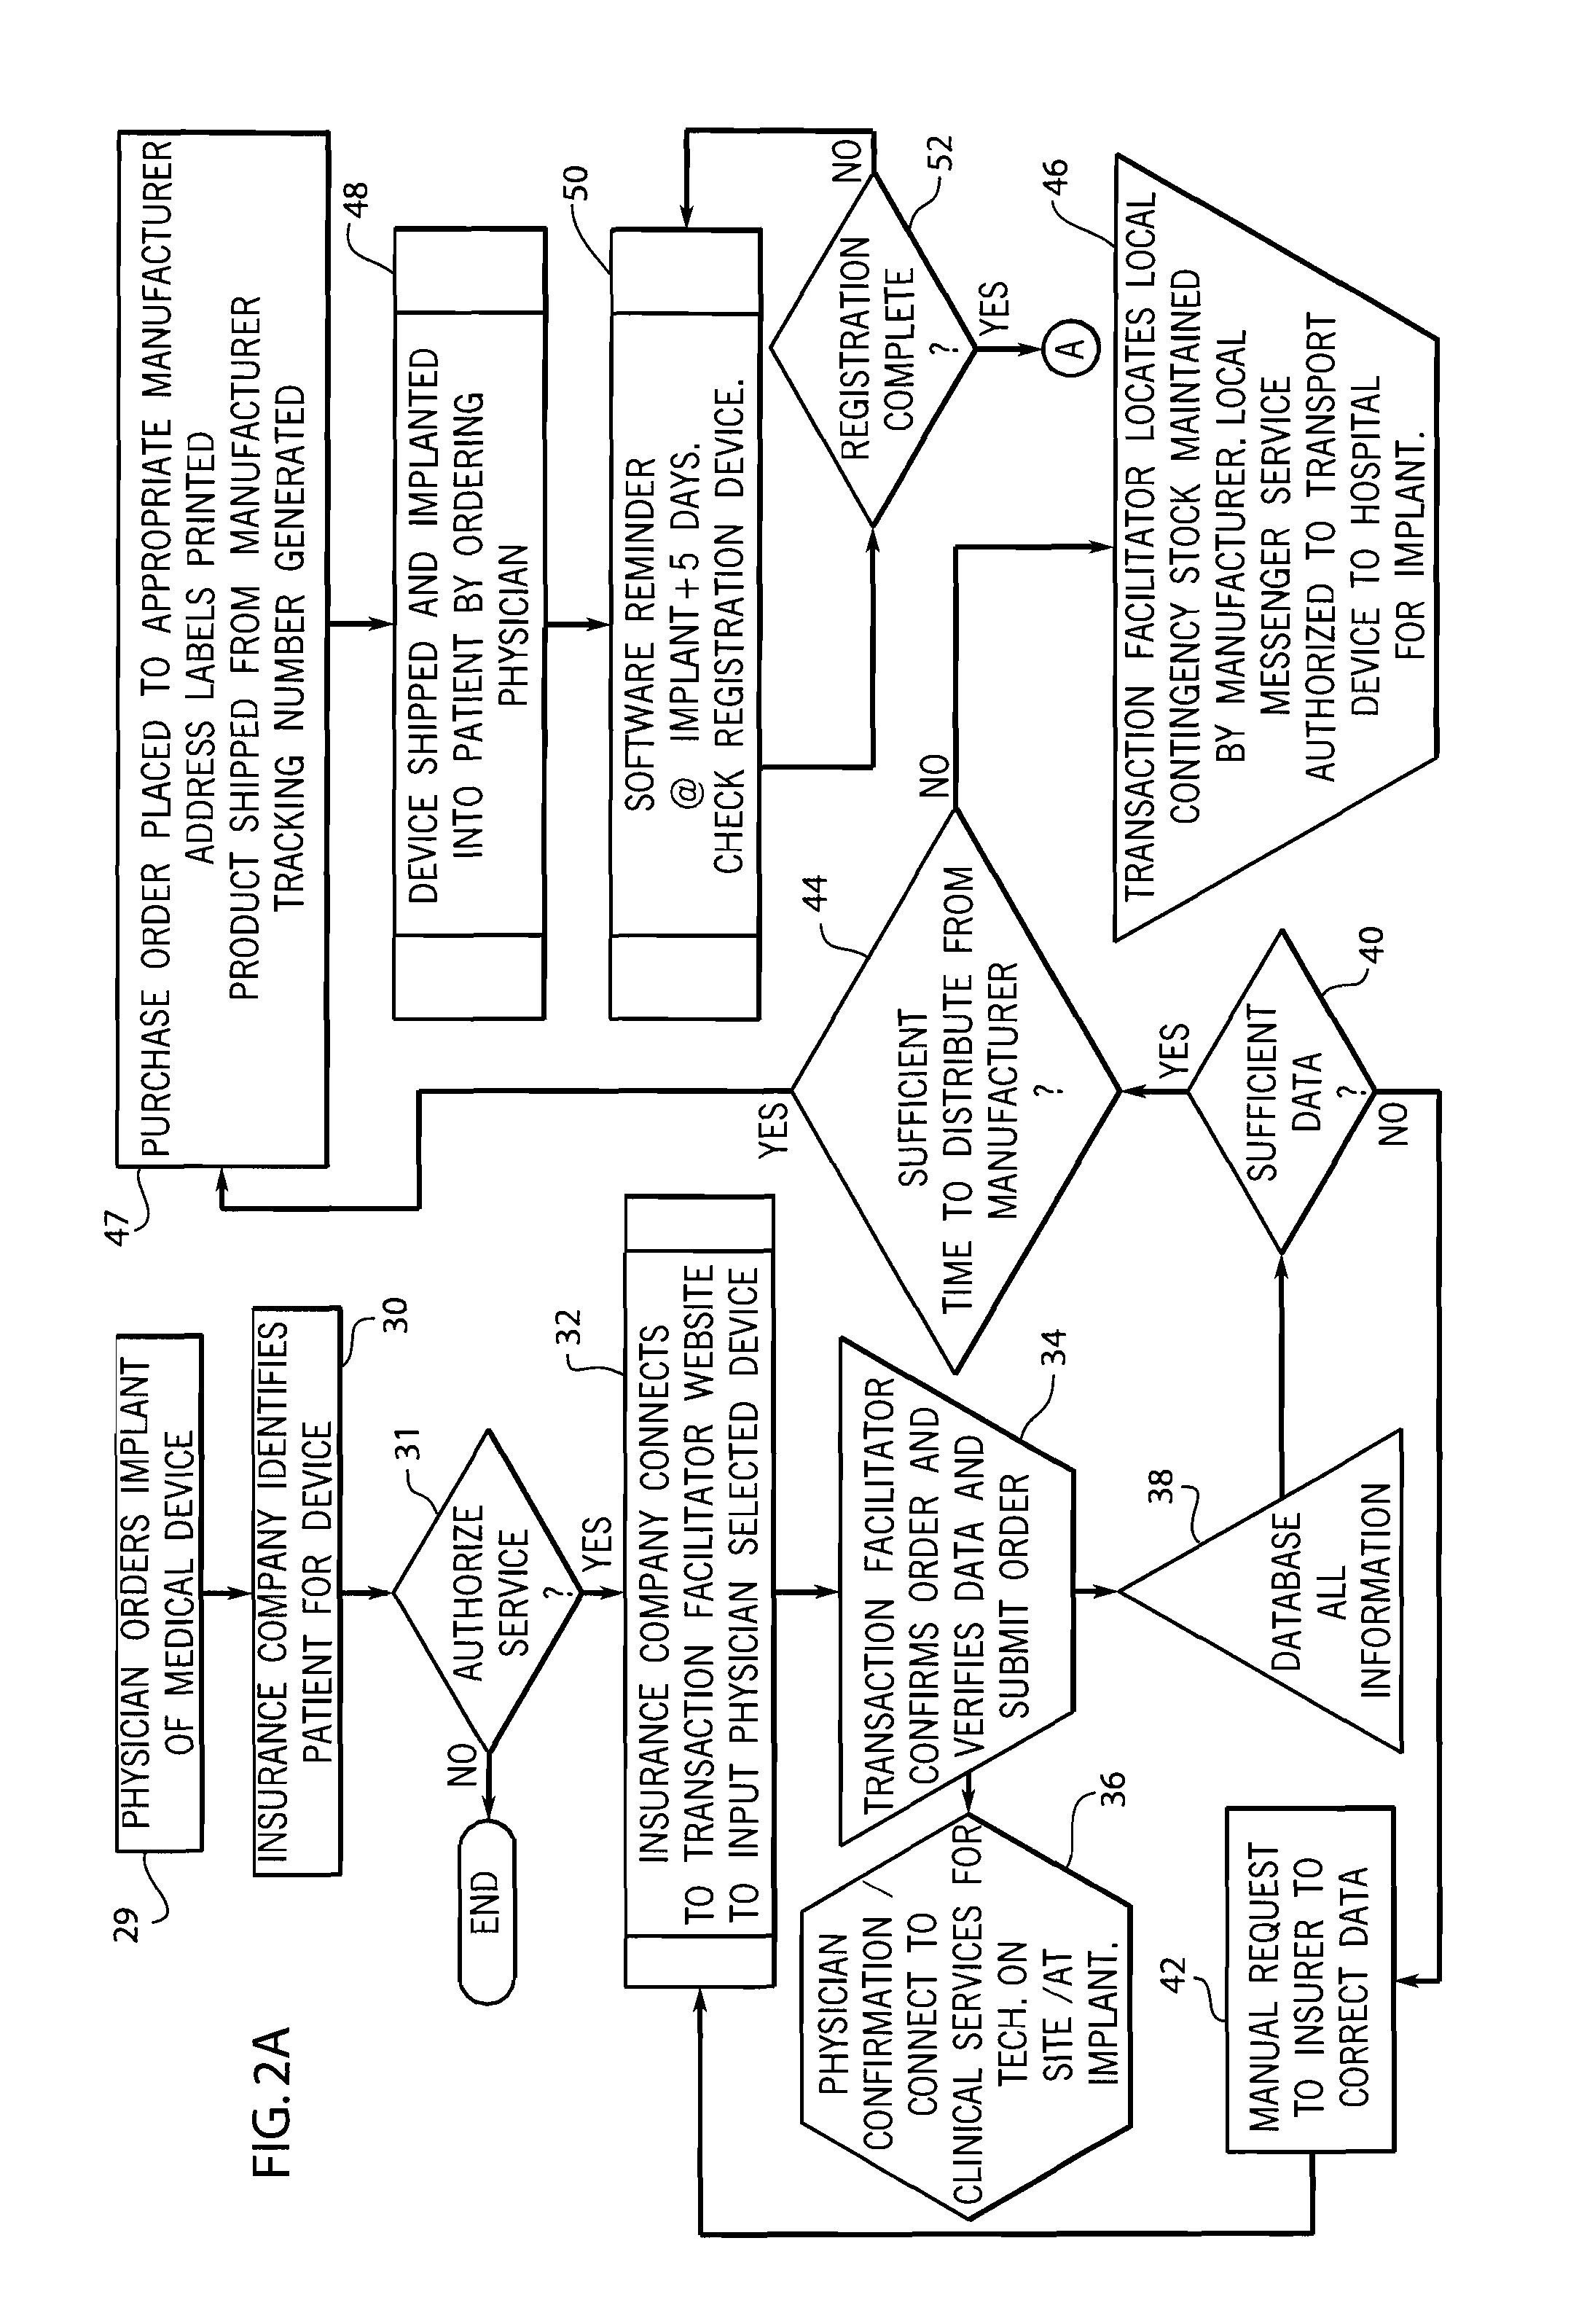 Method of product procurement and cash flow including a manufacturer, a transaction facilitator, and third party payor